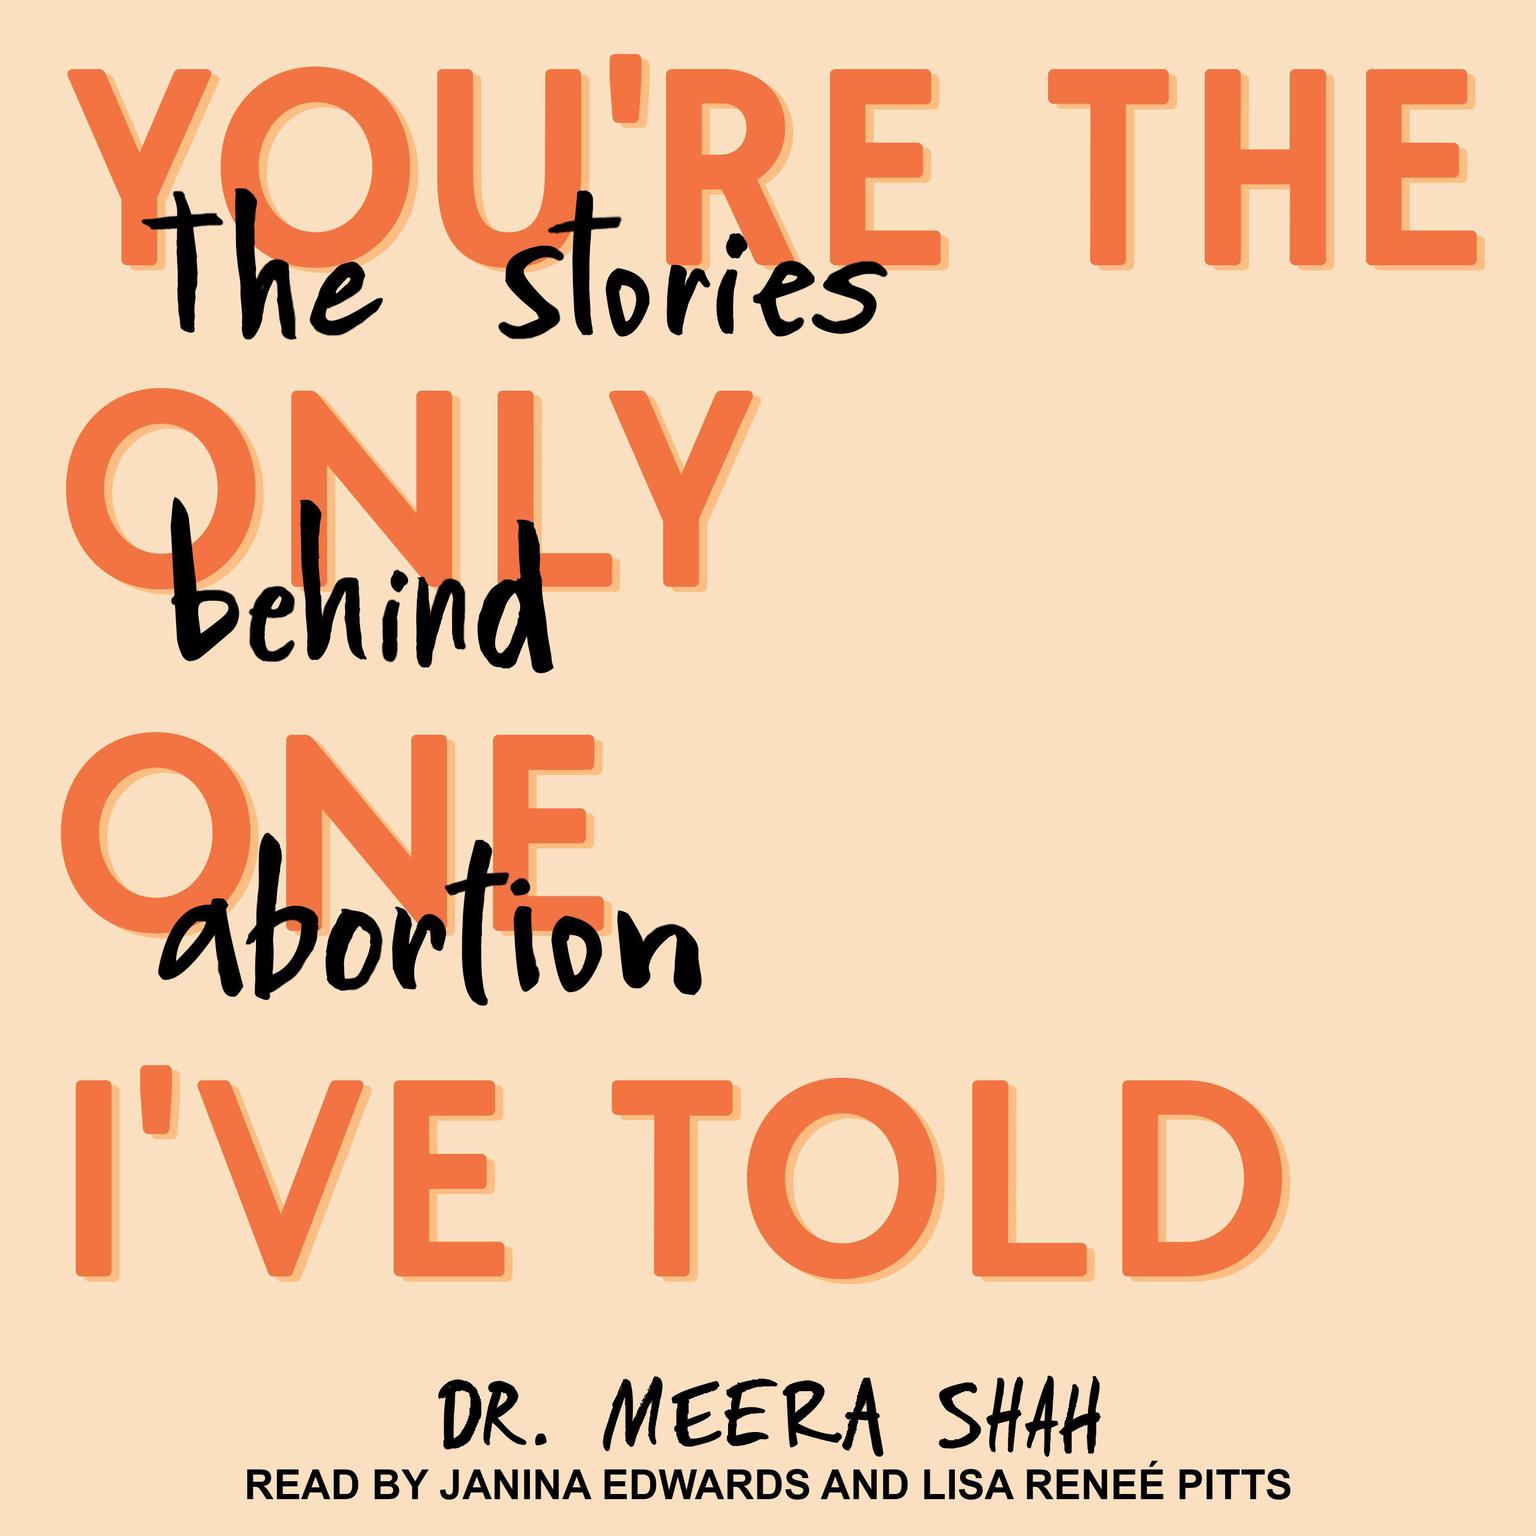 Youre the Only One Ive Told: The Stories Behind Abortion Audiobook, by Meera Shah